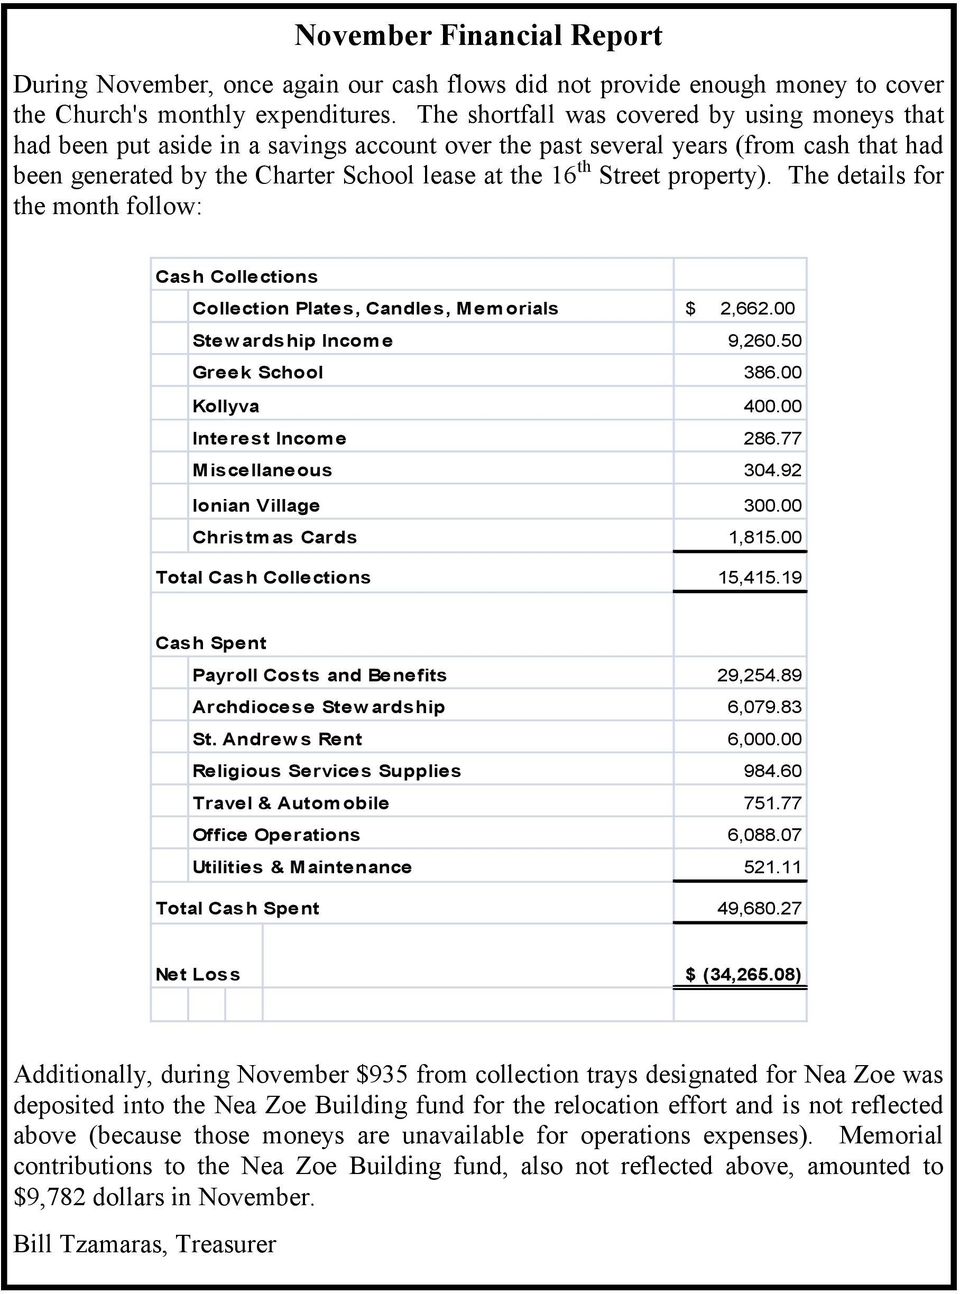 property). The details for the month follow: Cash Collections Collection Plates, Candles, Memorials $ 2,662.00 Stew ardship Income 9,260.50 Greek School 386.